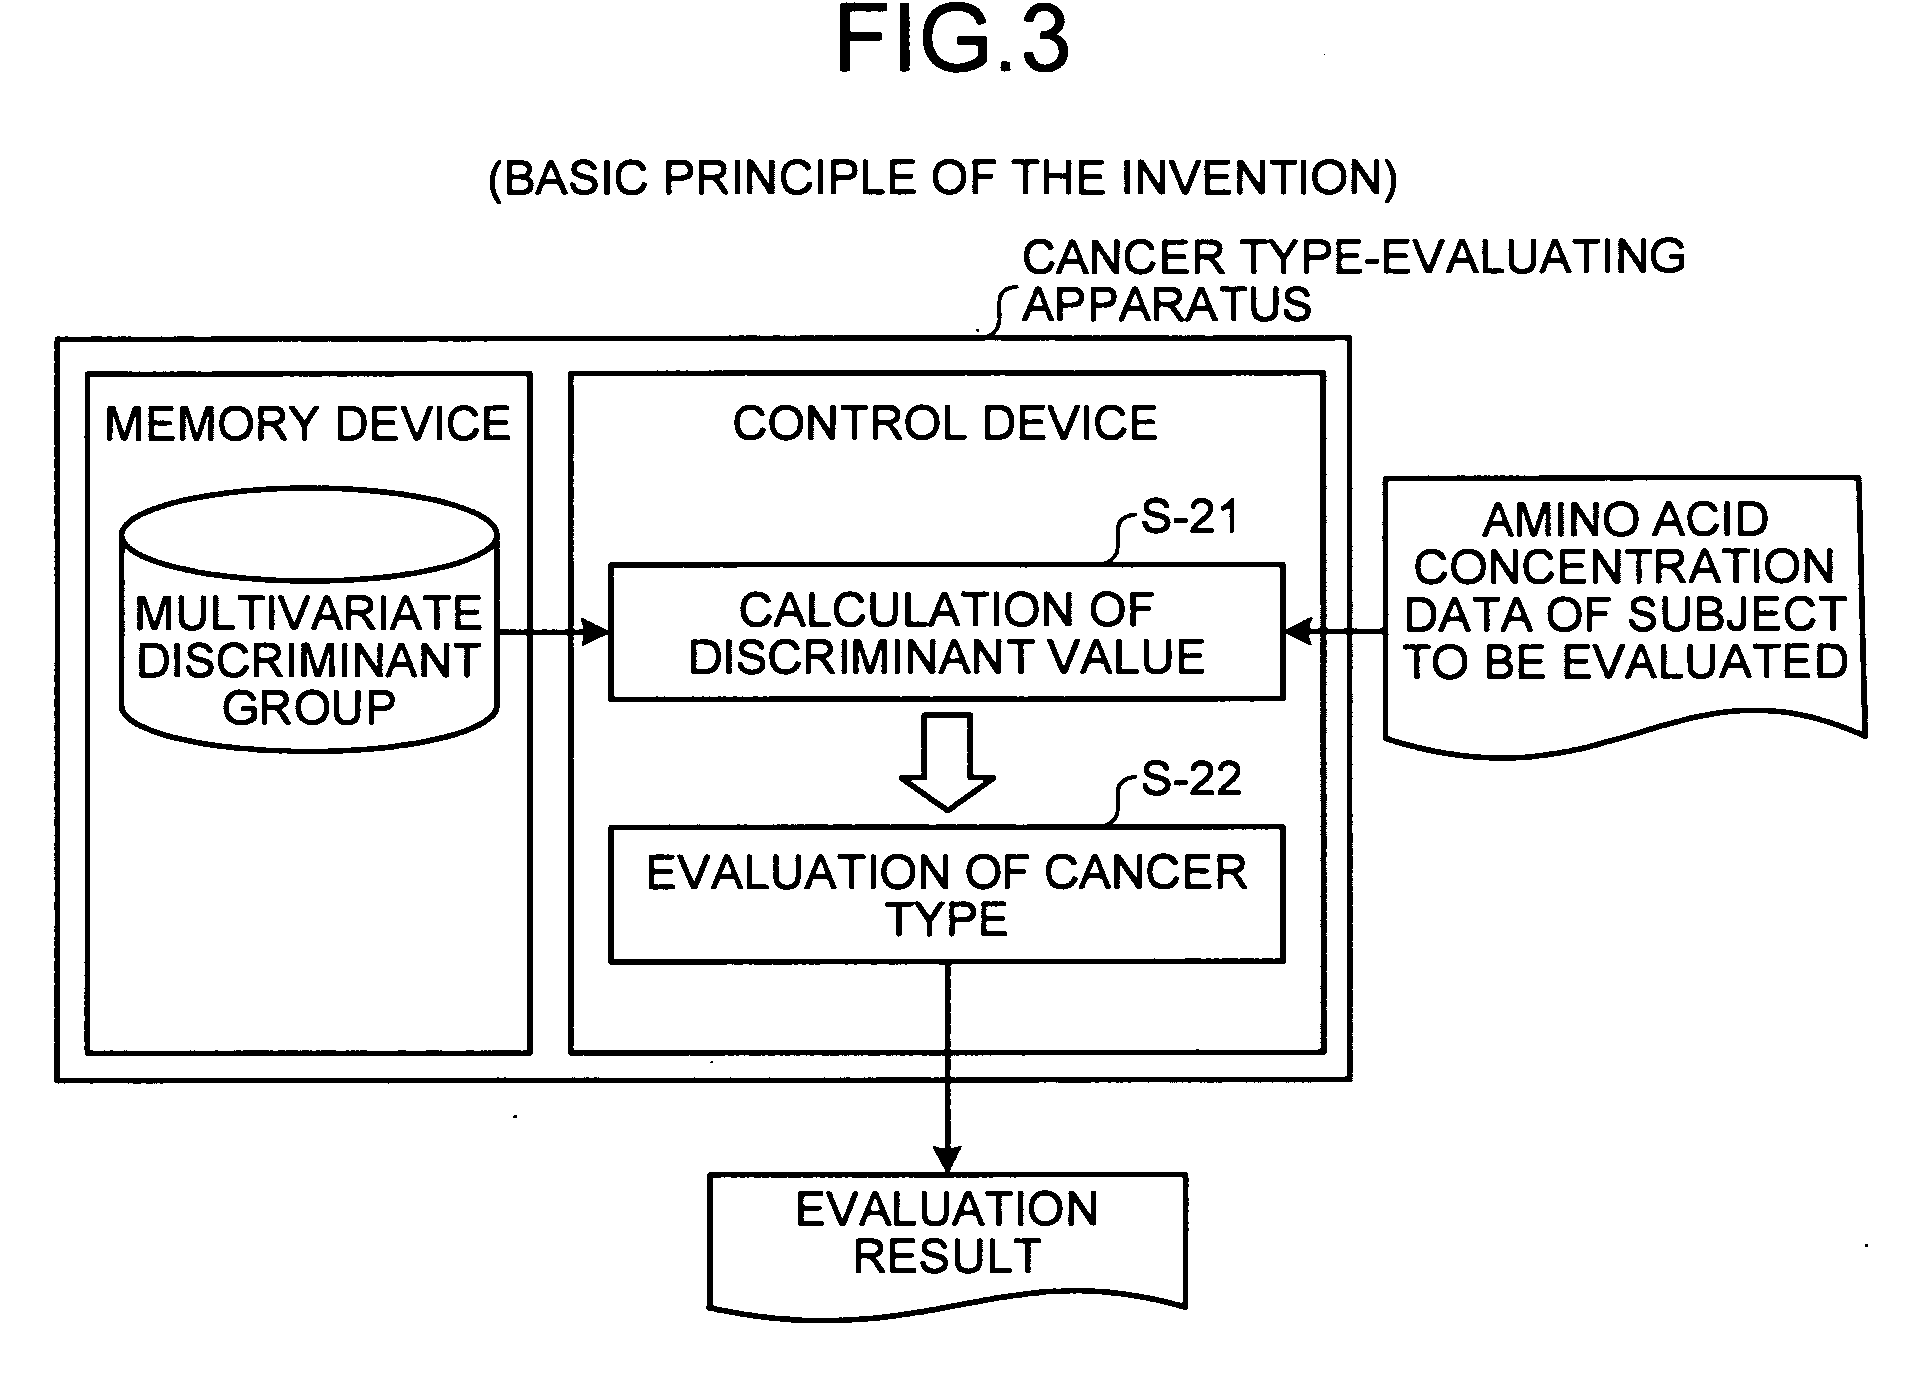 Method of evaluating cancer type